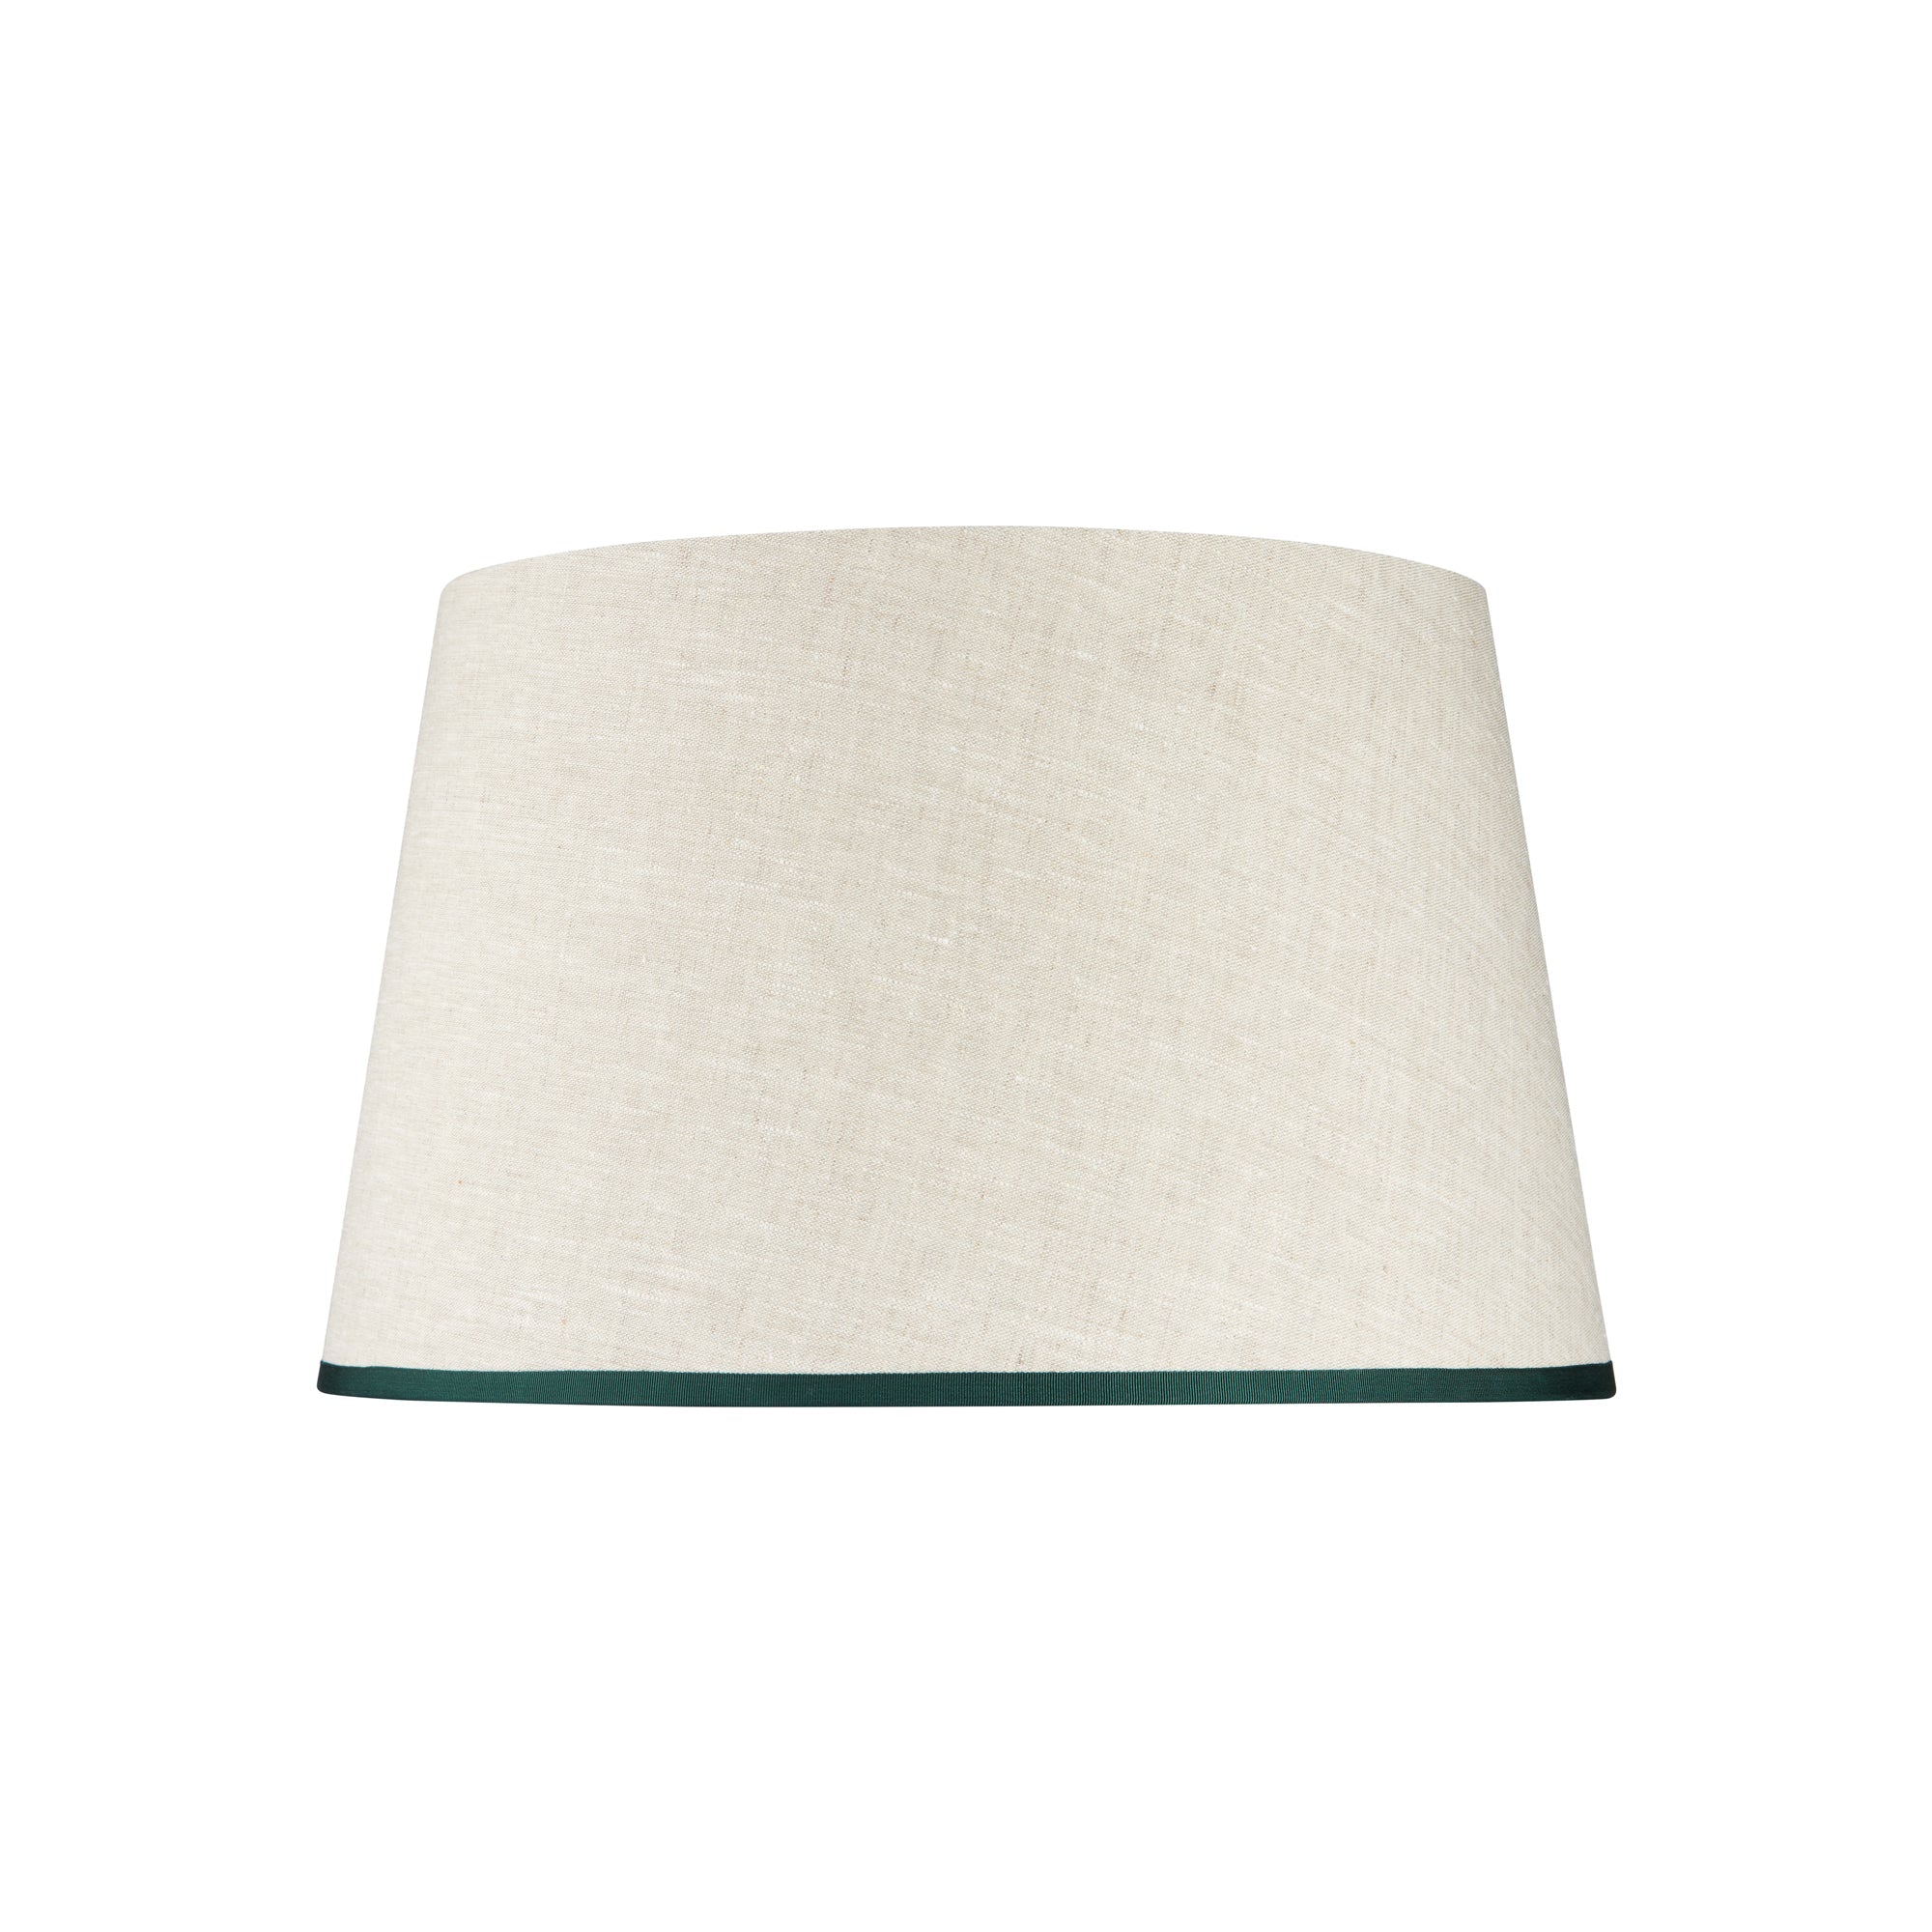 STRETCHED CREAM LINEN LAMPSHADE WITH RIBBED ARTICHOKE GREEN TRIM